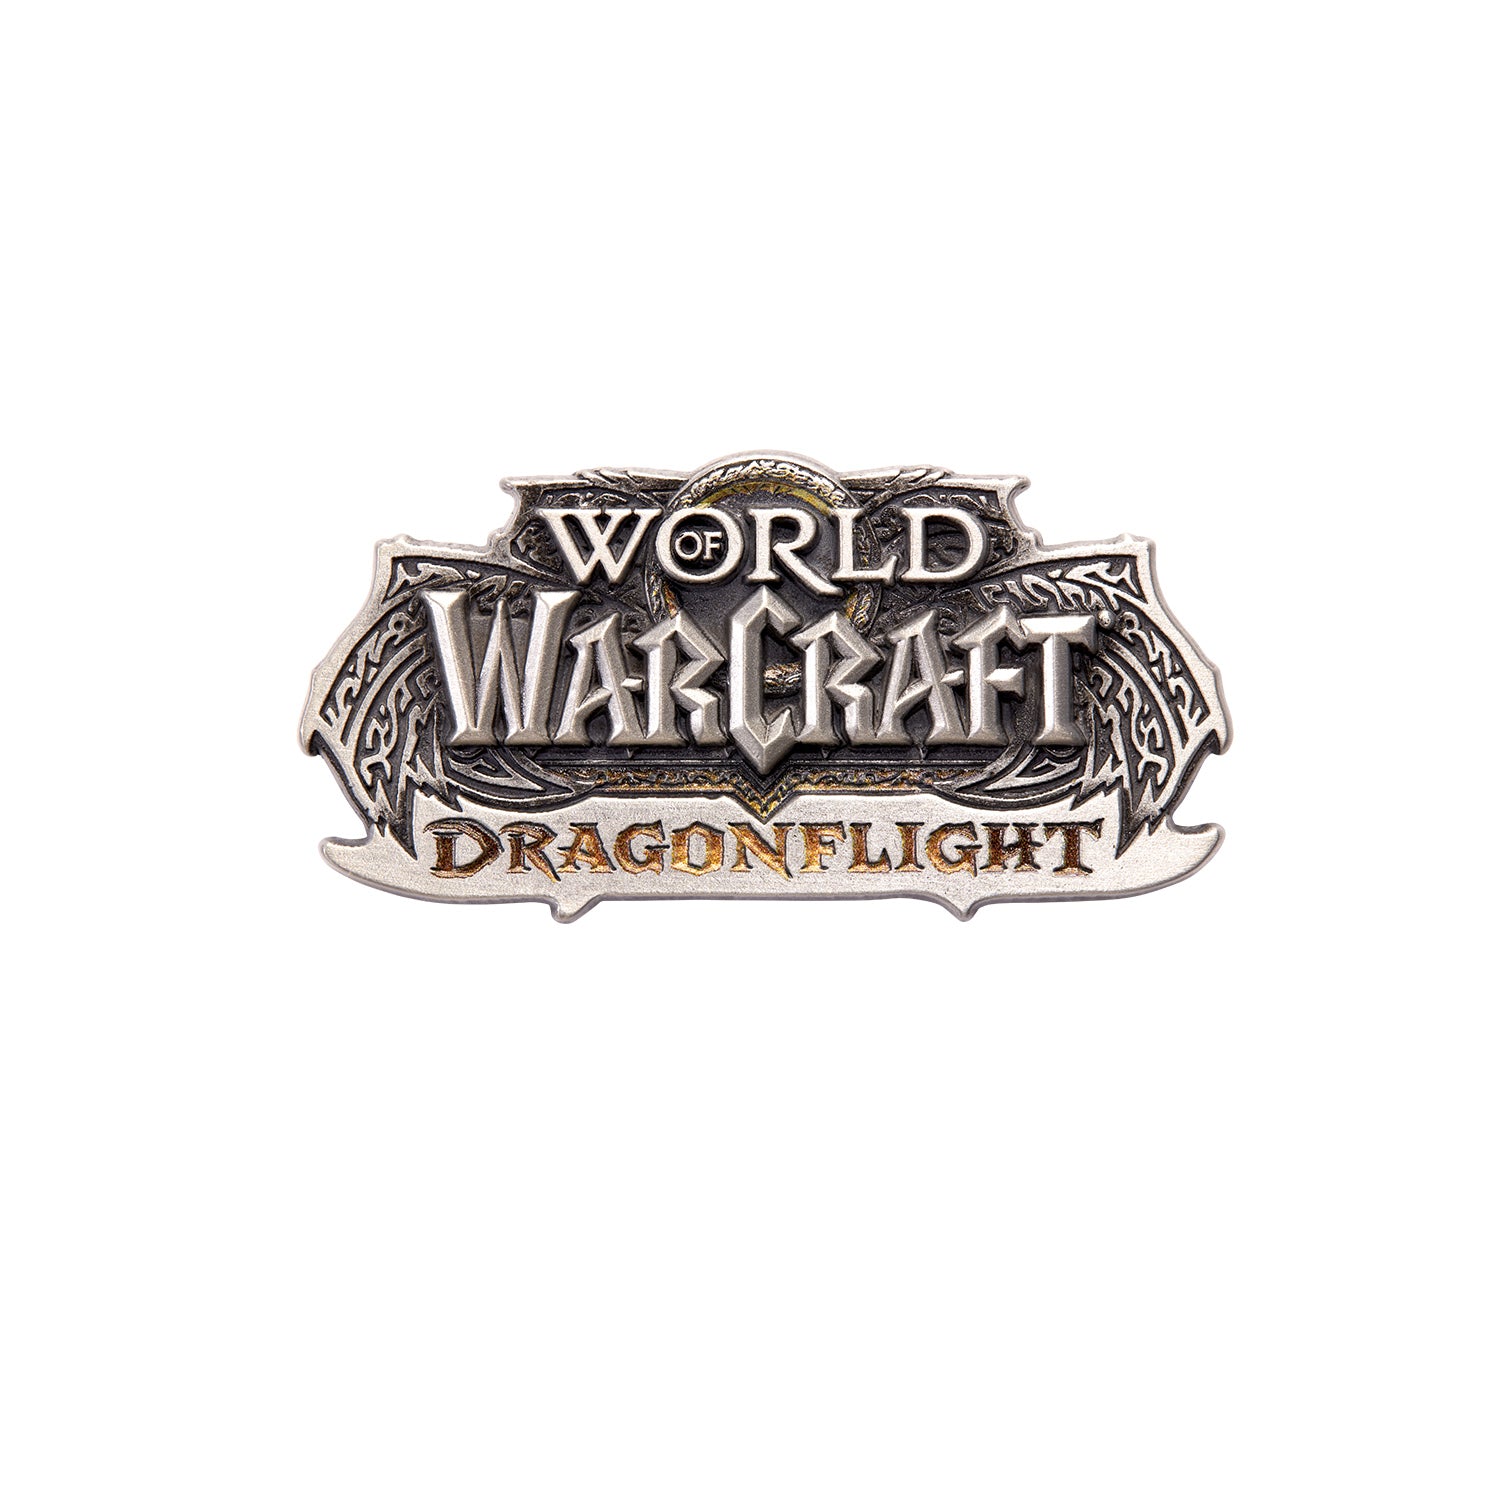 World of Warcraft Dragonflight Logo Collector's Edition Pin - Close Up View